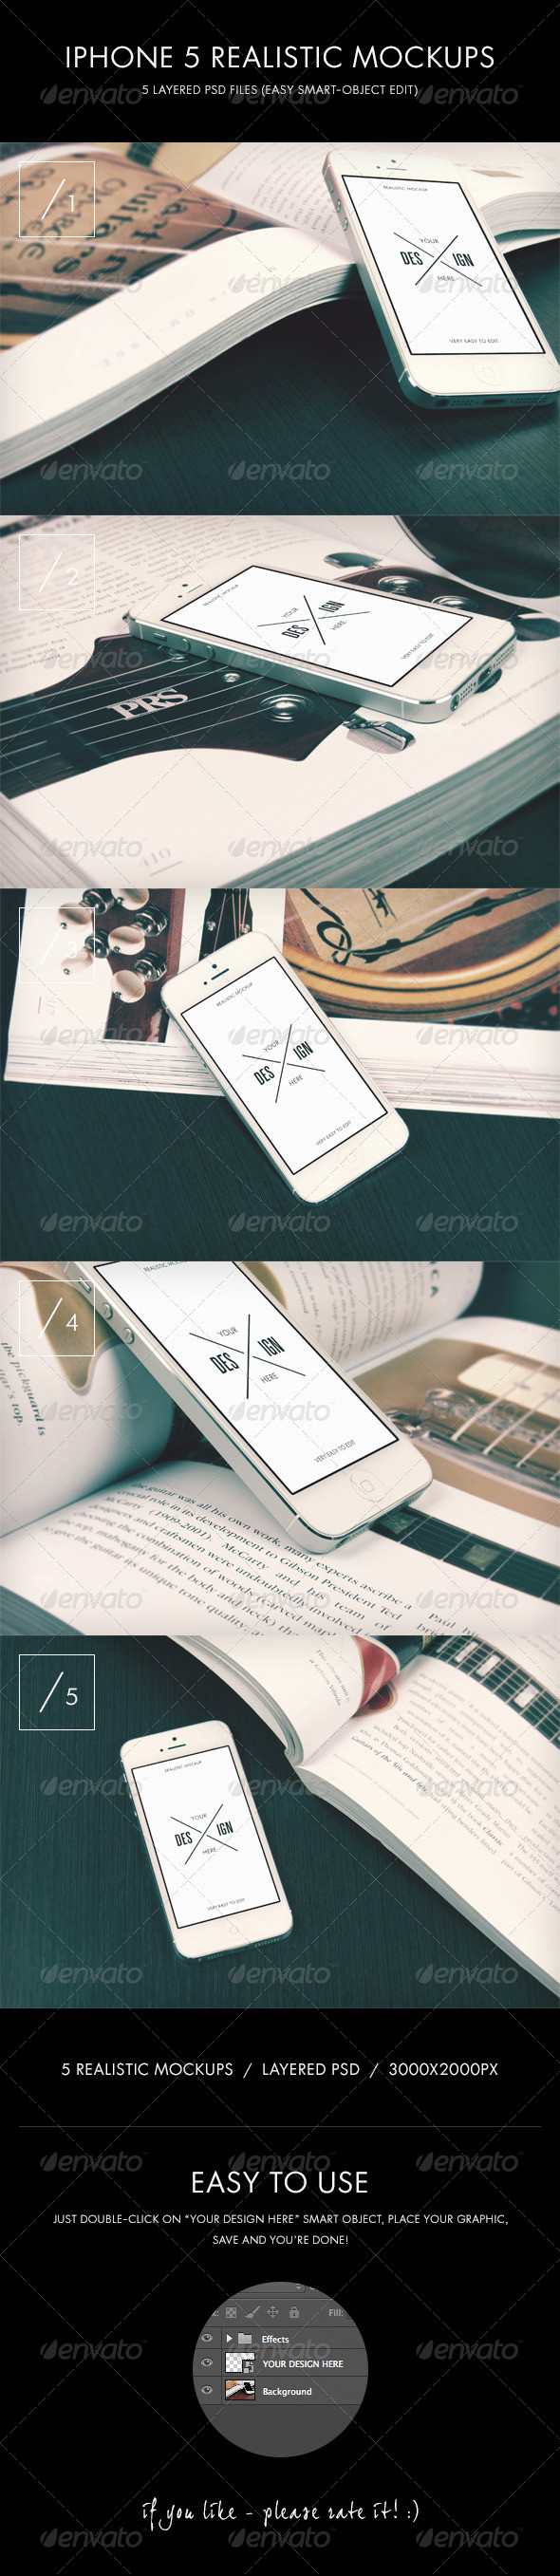 Iphone5 realistic mockups preview